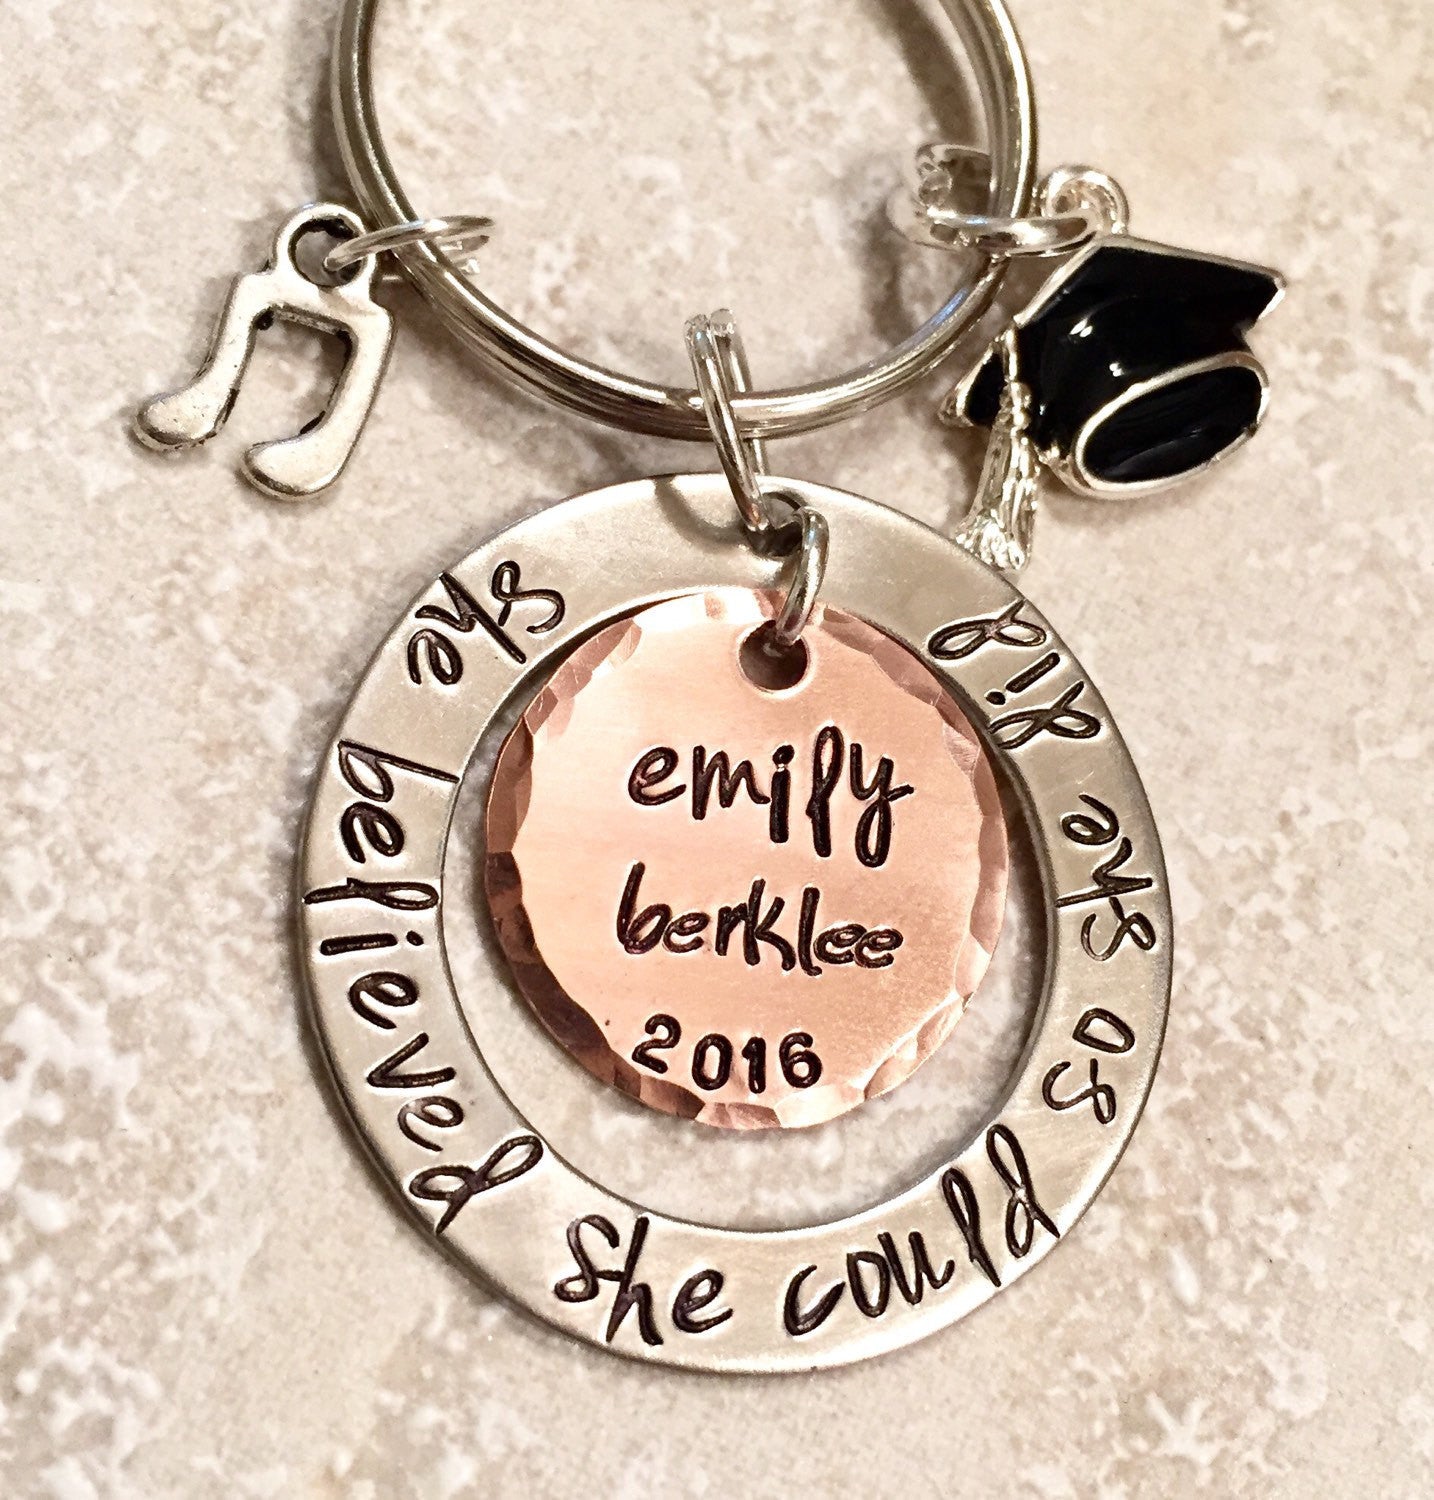 High School Graduation Gift, She Believed She Could So She Did, Graduation Music, graduation 2016, Personalized Graduation Gifts - Natashaaloha, jewelry, bracelets, necklace, keychains, fishing lures, gifts for men, charms, personalized, 